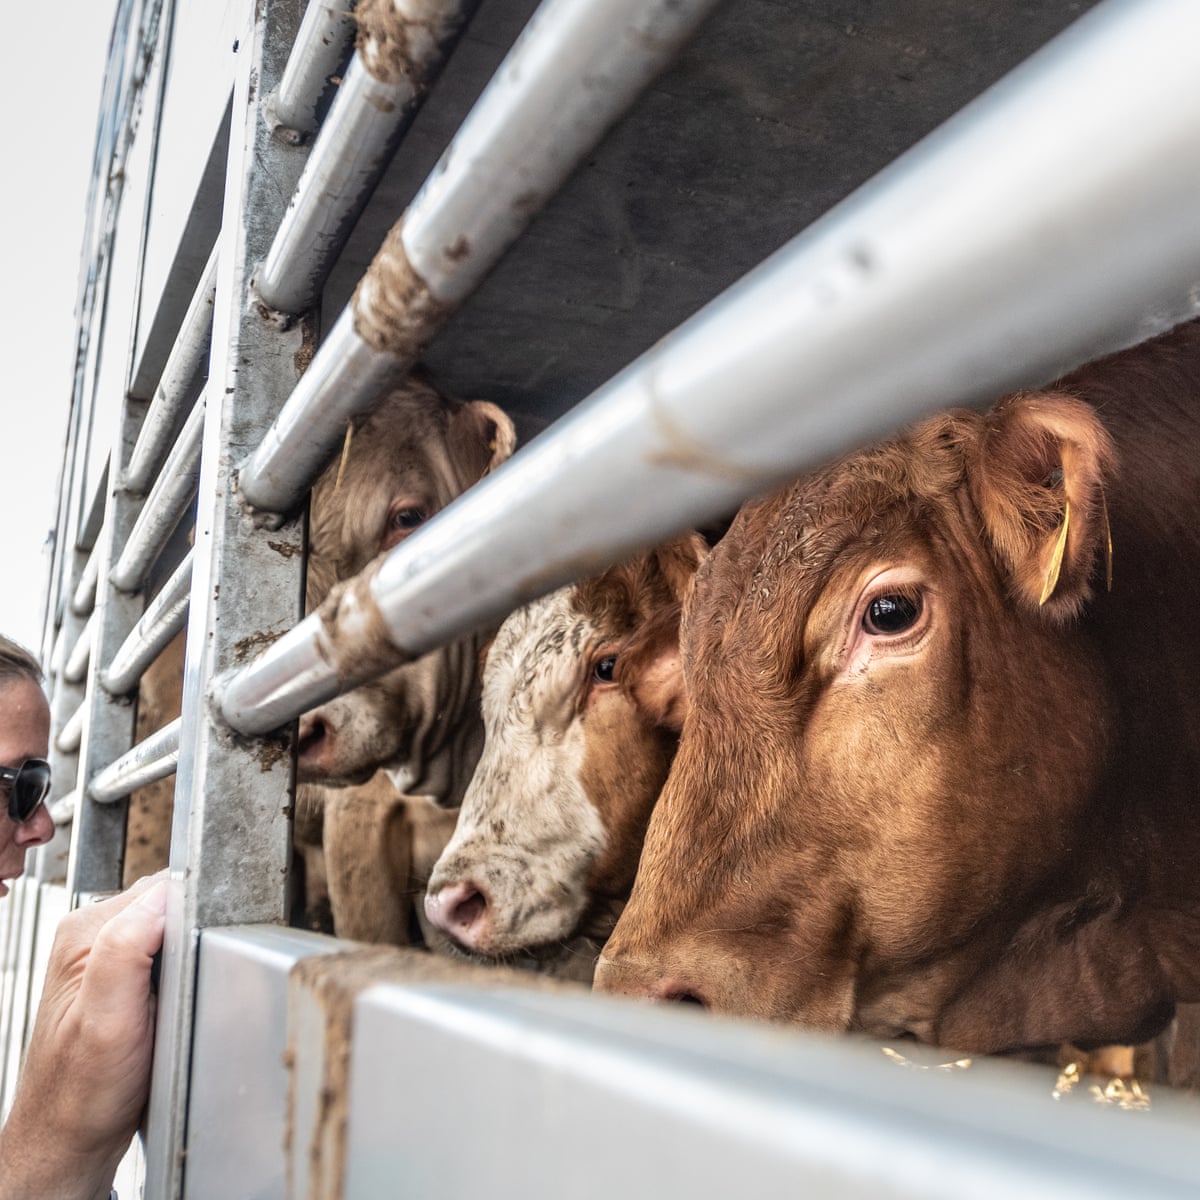 This one has heat stress': the shocking reality of live animal exports |  Animal welfare | The Guardian